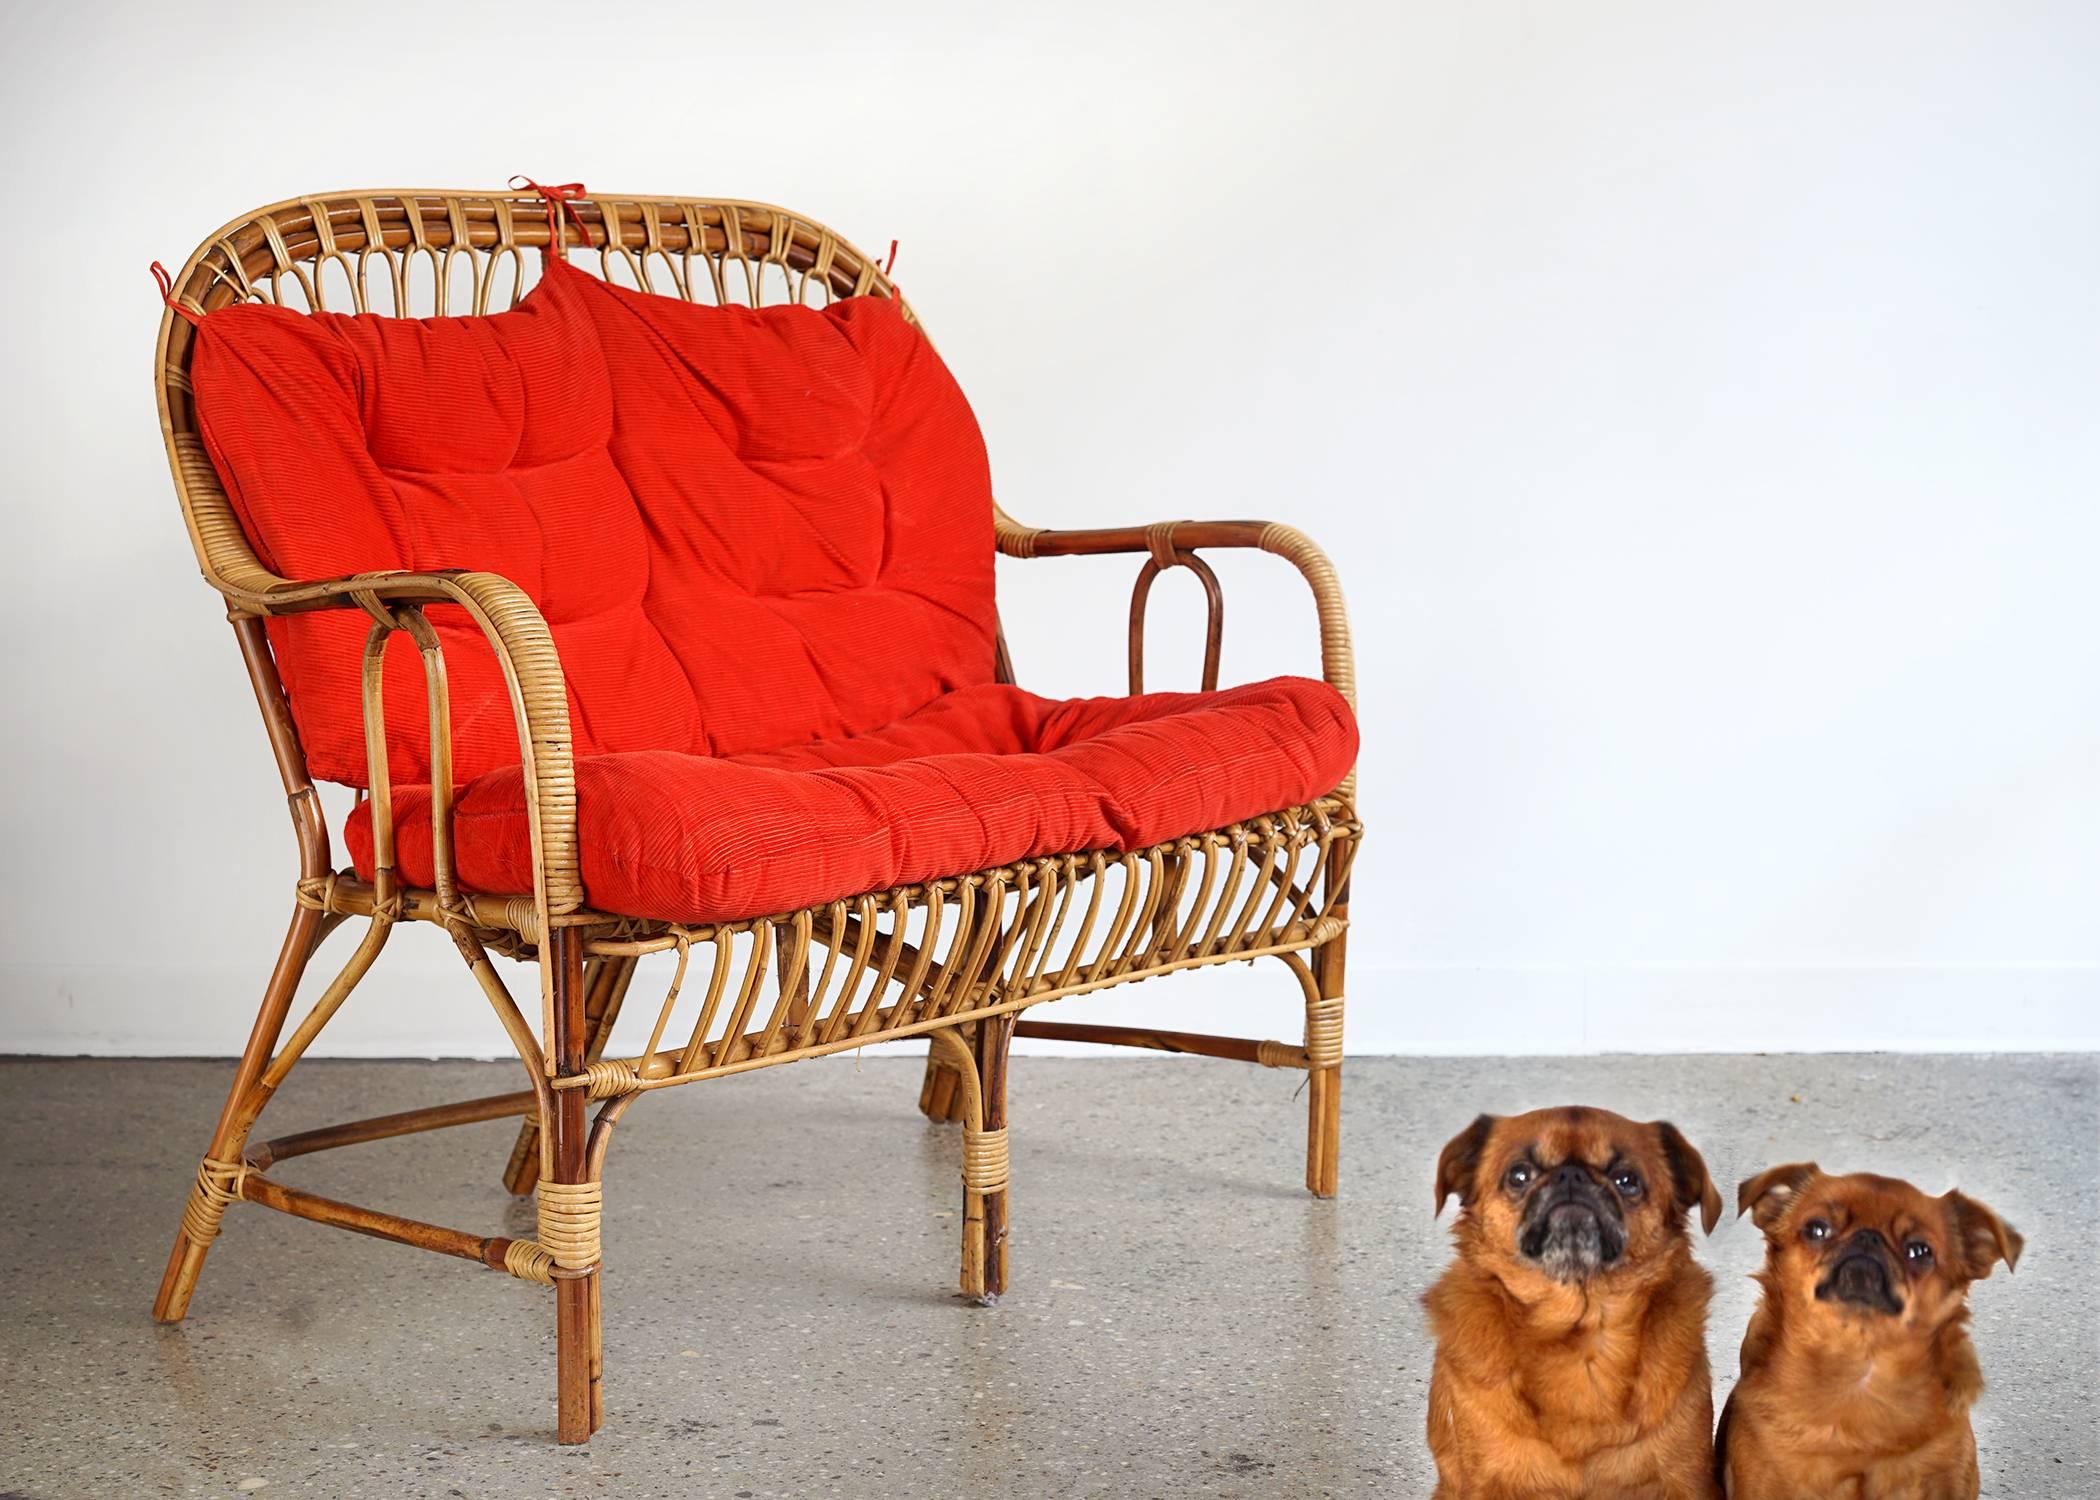 Lovely sculptural frame with charming proportions. Its light weight and airy appearance belie its strength and sturdiness. Original red corduroy cushions.